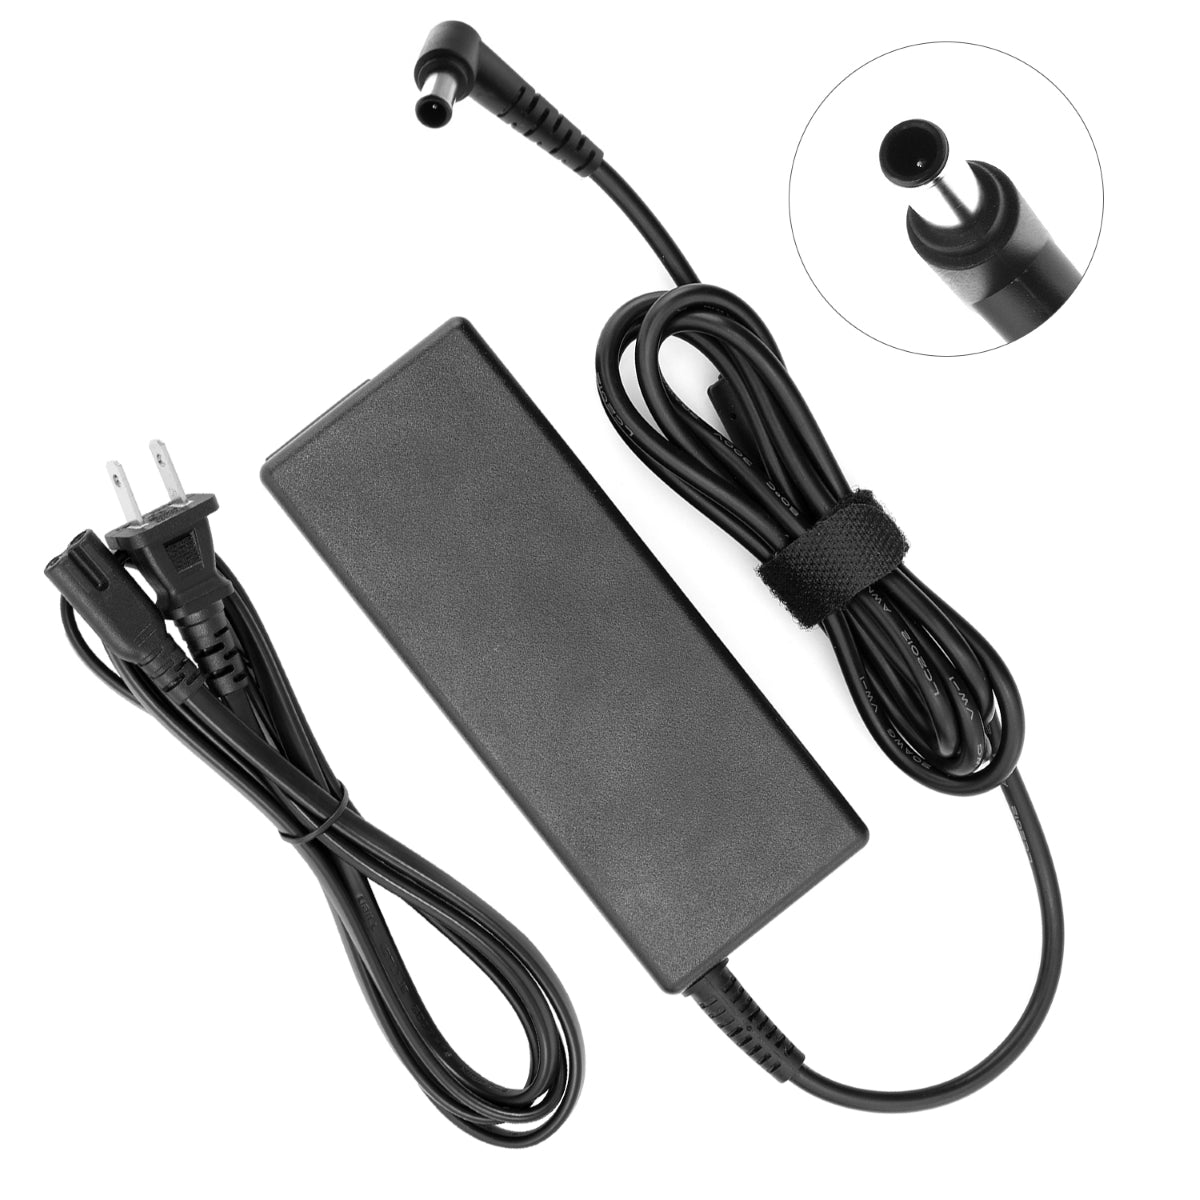 AC Adapter Power Supply for Samsung U28D590D TV Display